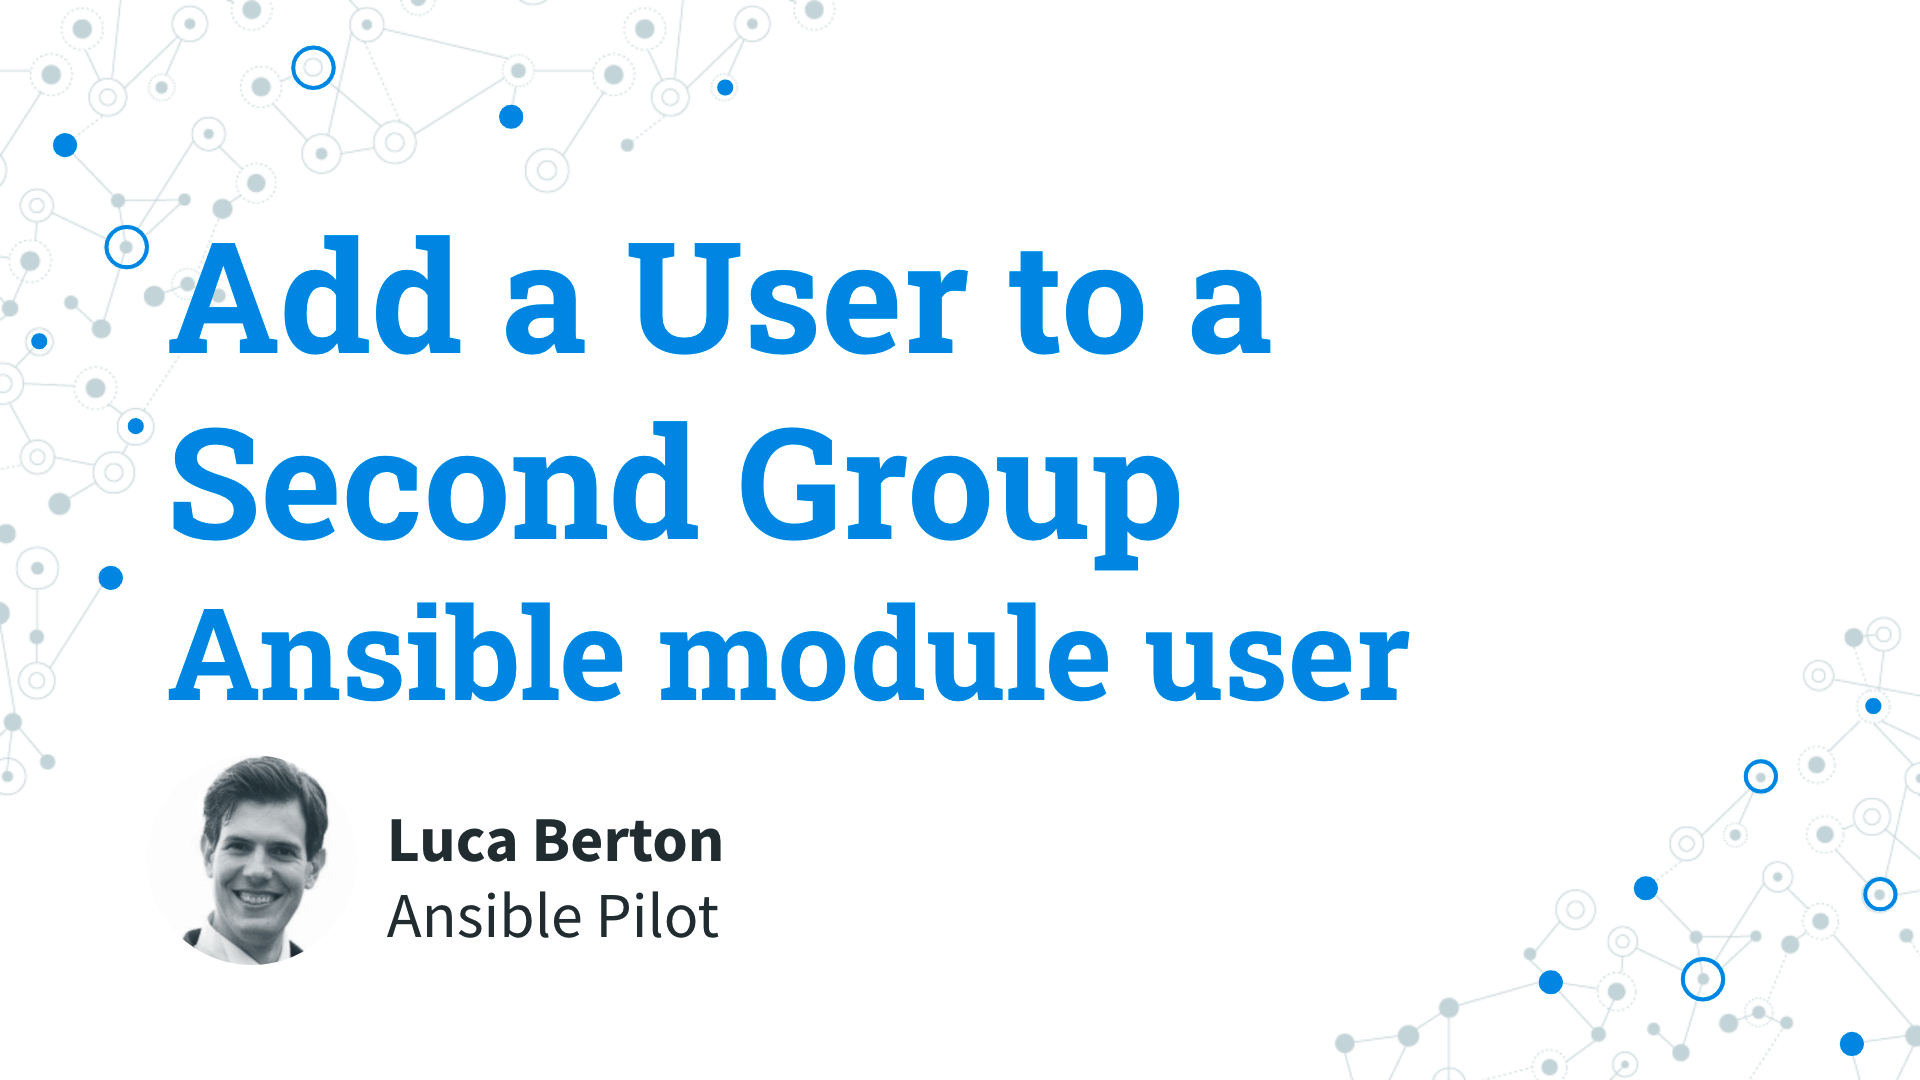 Add a User to a Second Group on Linux - Ansible module user